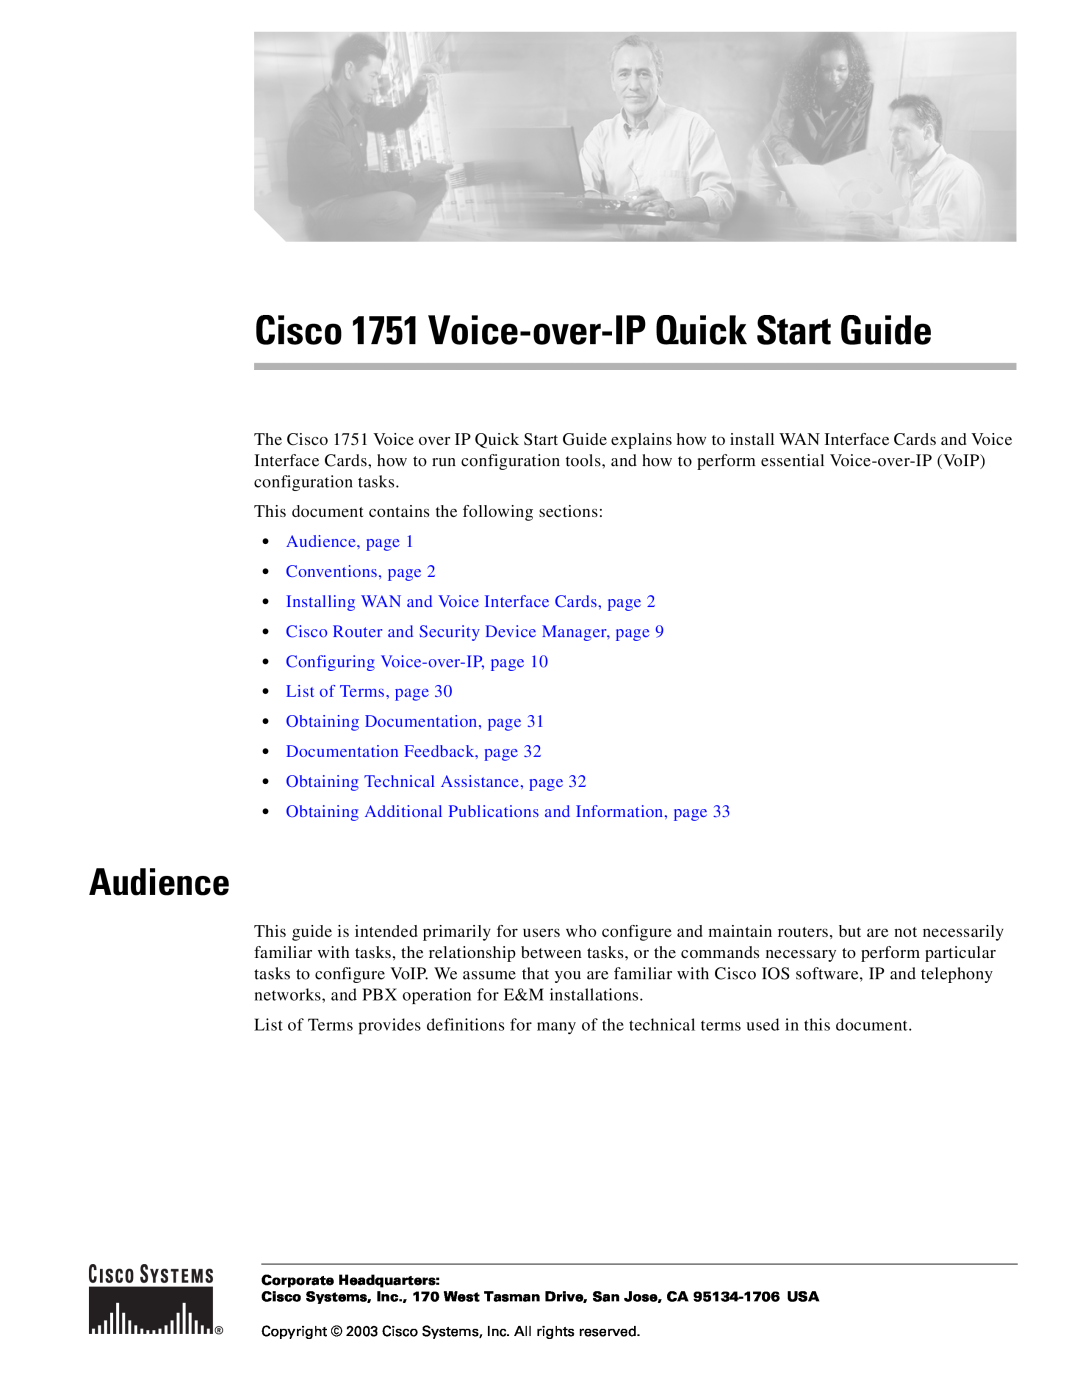 Cisco Systems CISCO1751 quick start Audience, page Conventions, page, Installing WAN and Voice Interface Cards, page 